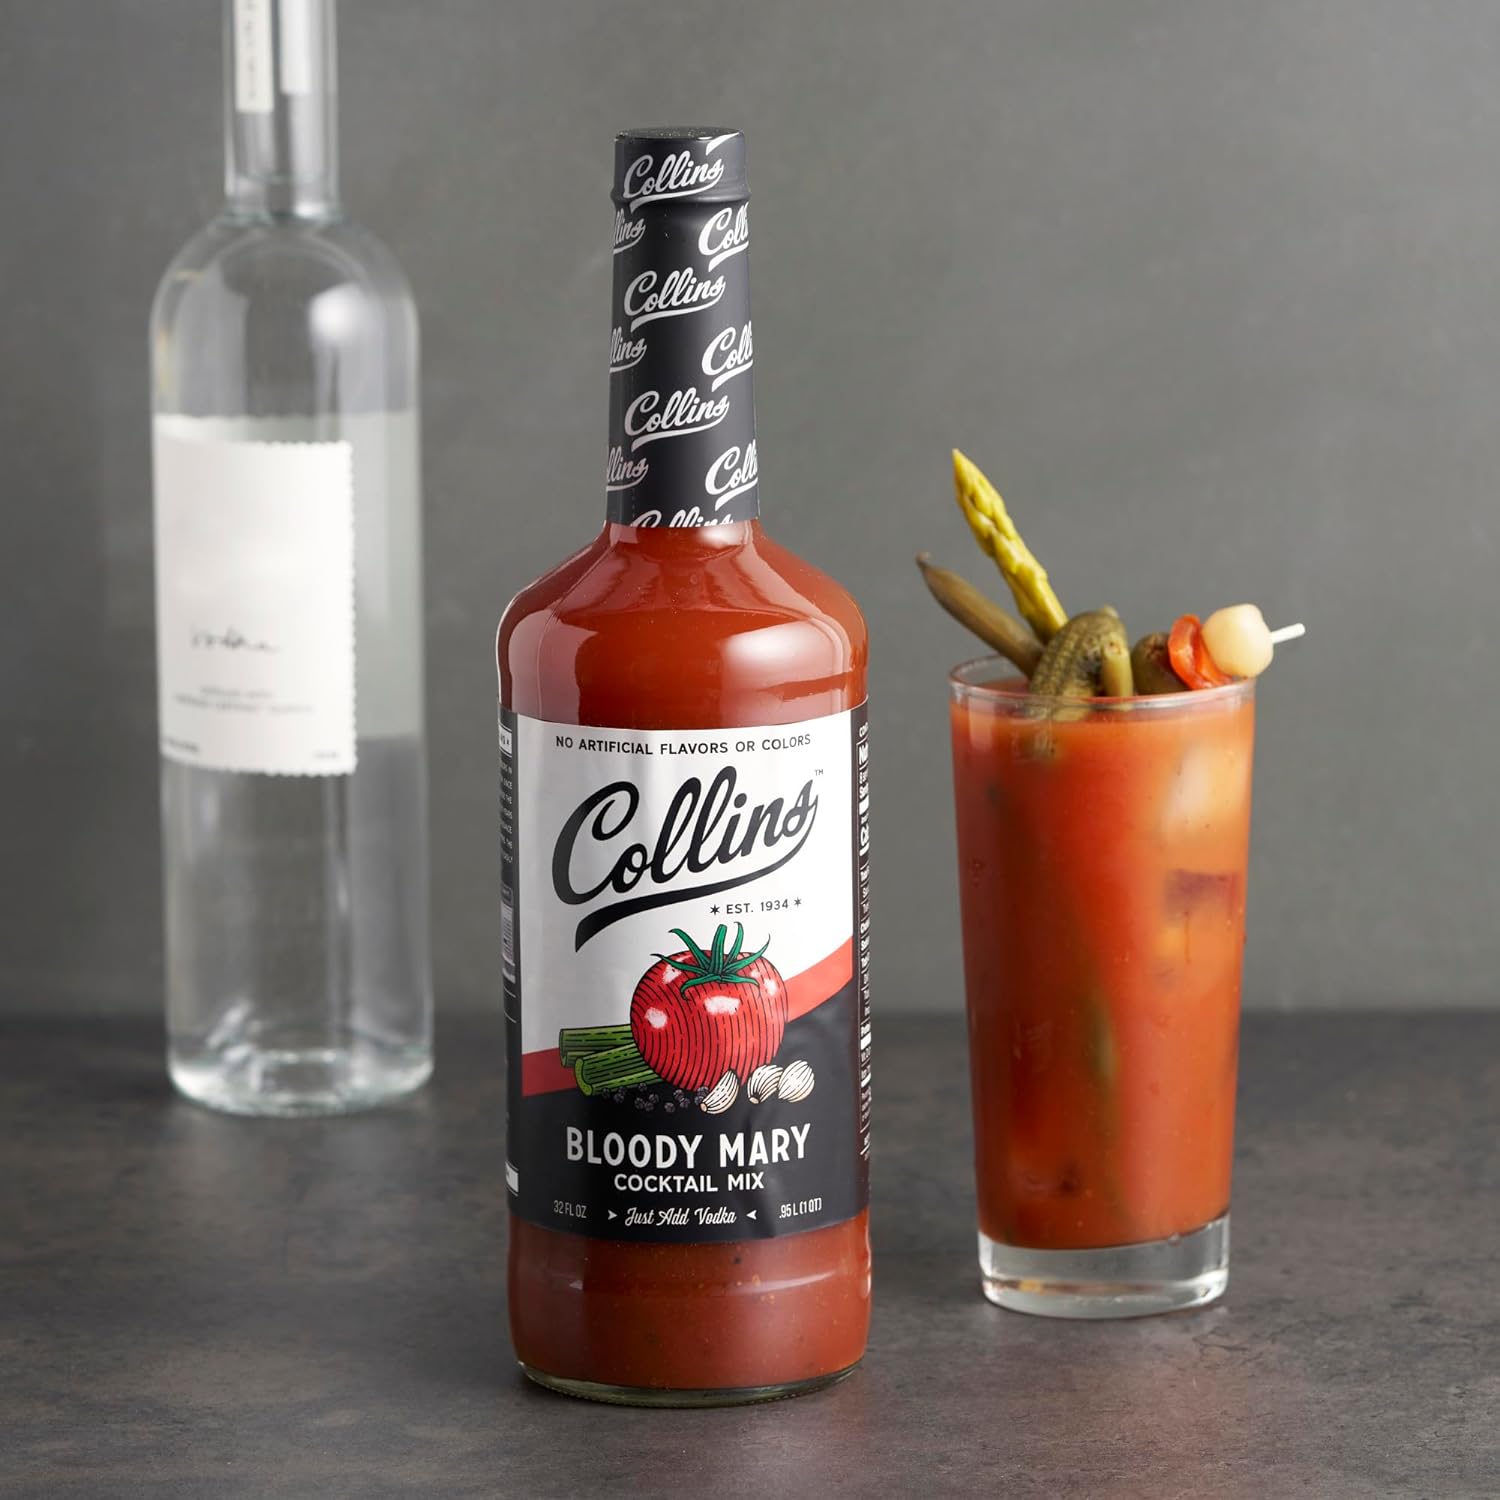 Collins Classic Bloody Mary Mix, Made With Tomato, Garlic, Worcestershire Sauce and Spices, Brunch Cocktail Recipe Ingredient, Bartender Mixer, Drinking Gifts, Home Cocktail bar, 32 fl oz : Clothing, Shoes & Jewelry